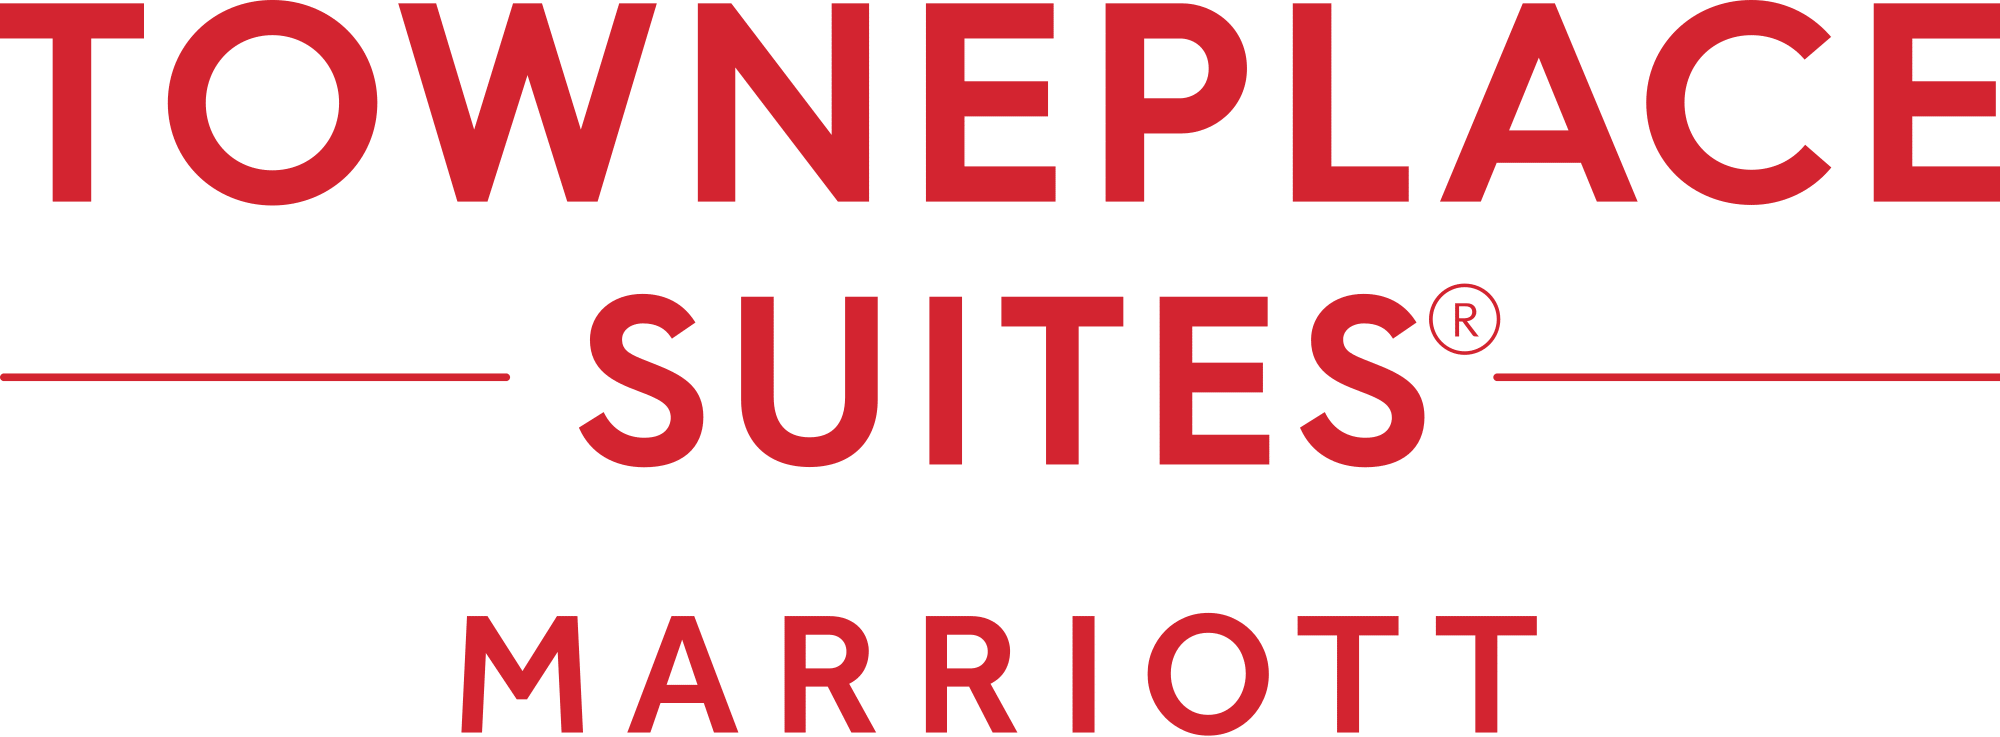 TownePlace_Suites_logo.svg